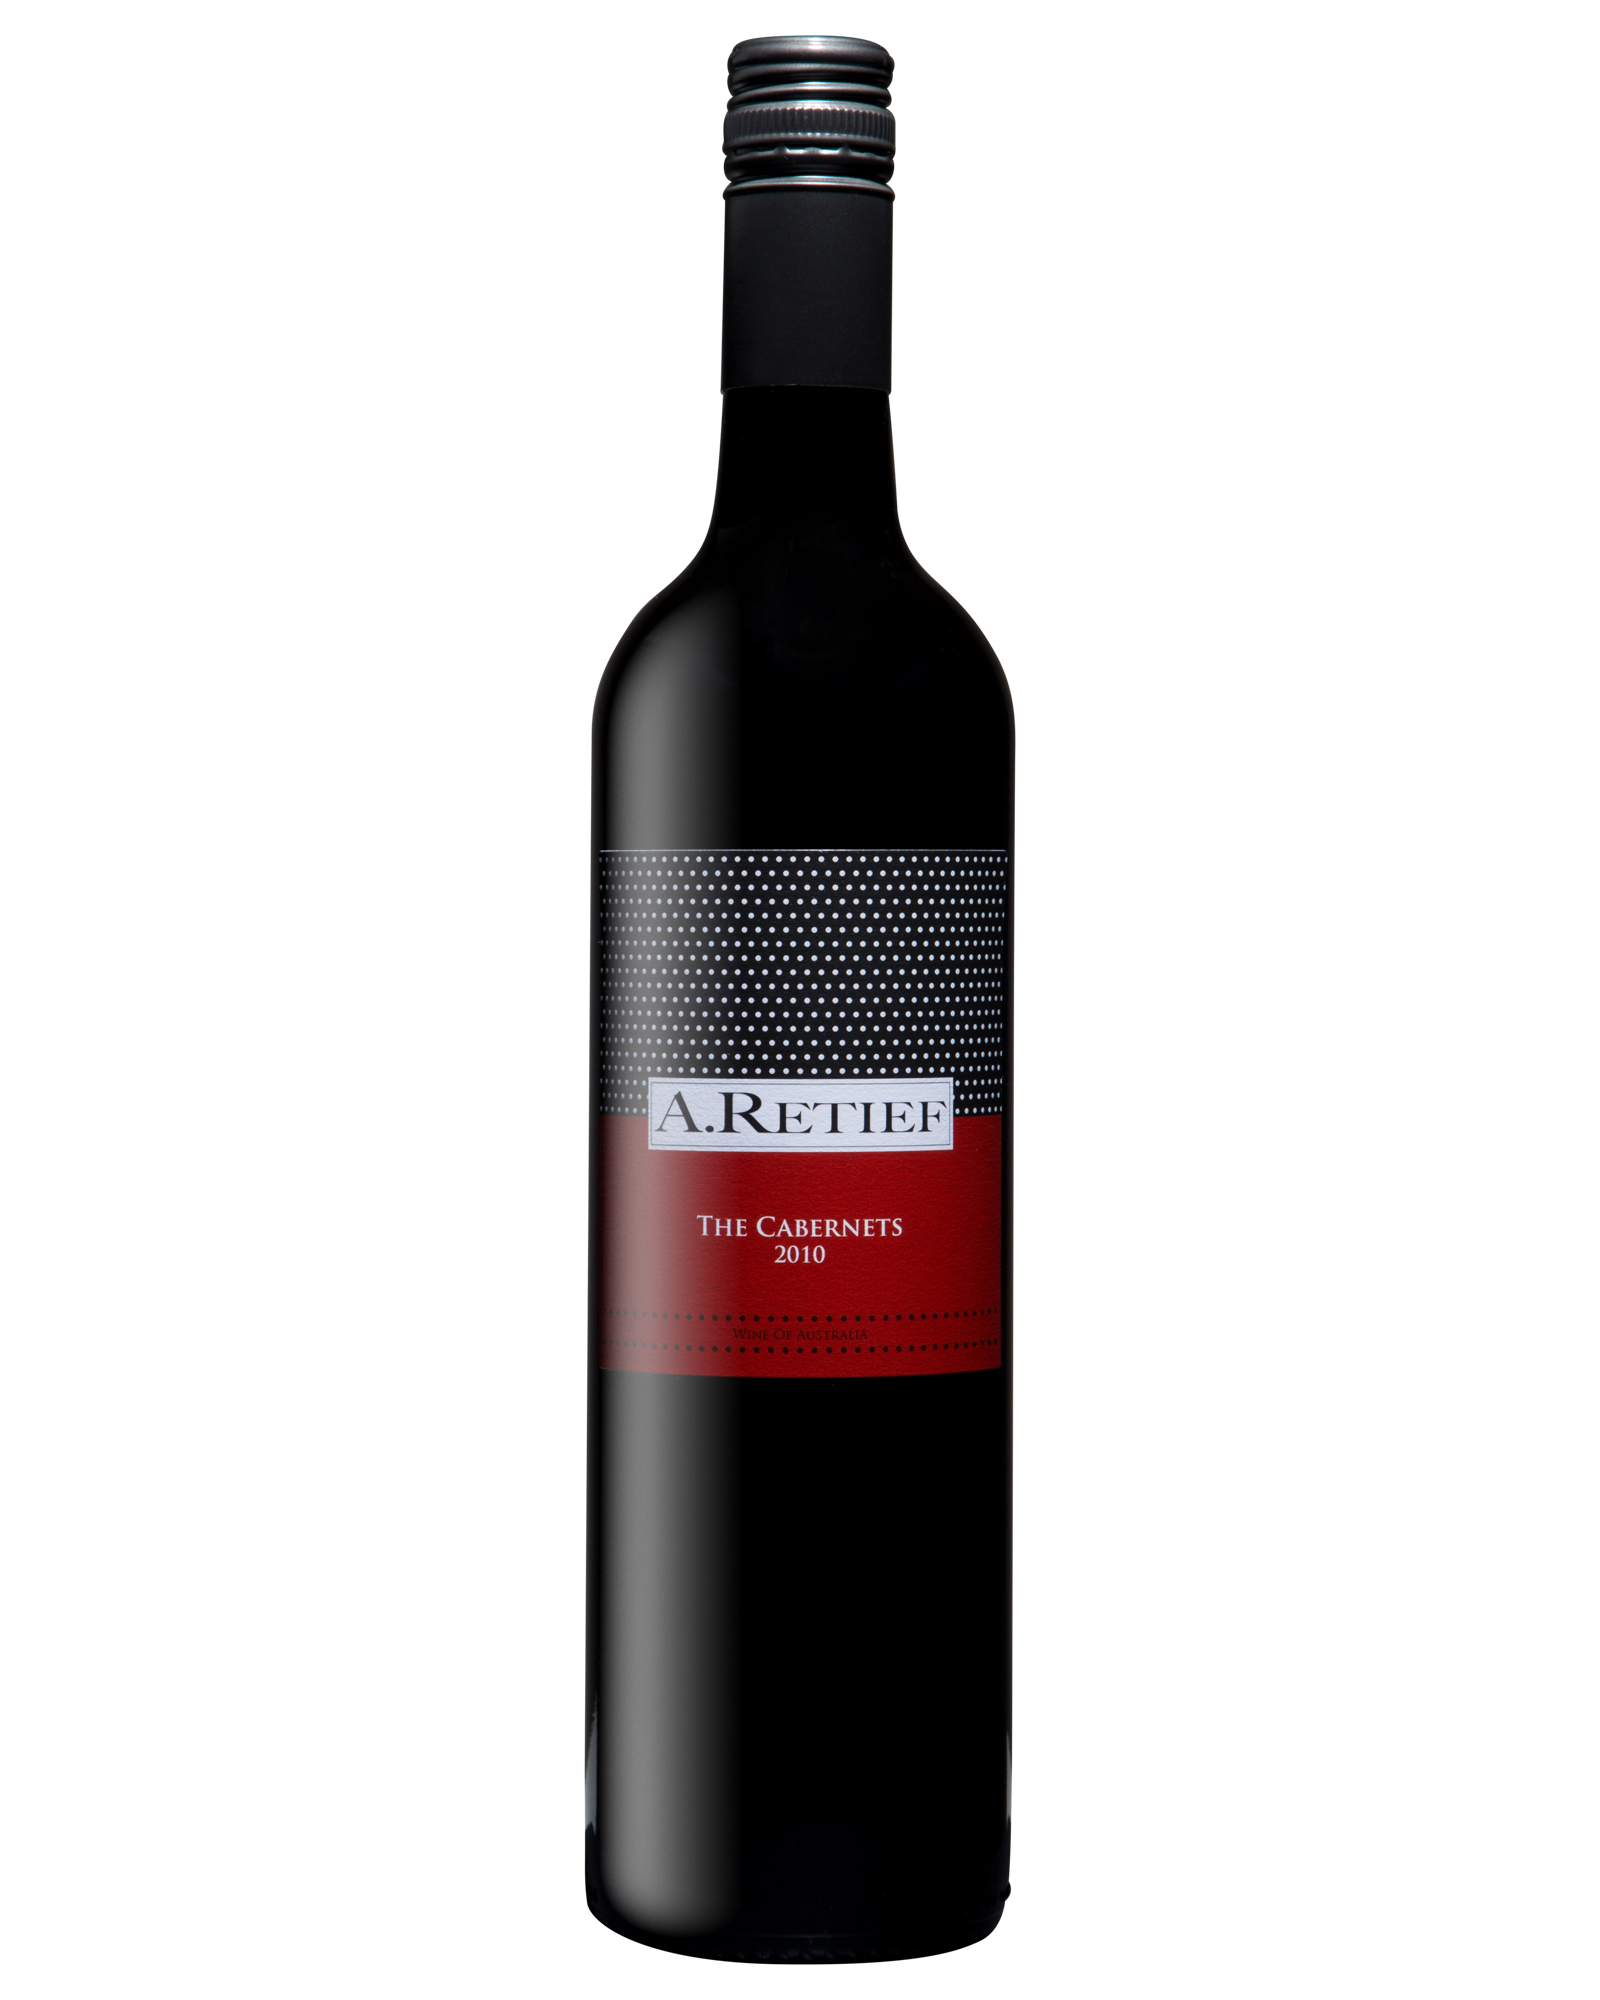 A.Retief The Cabernets 2010